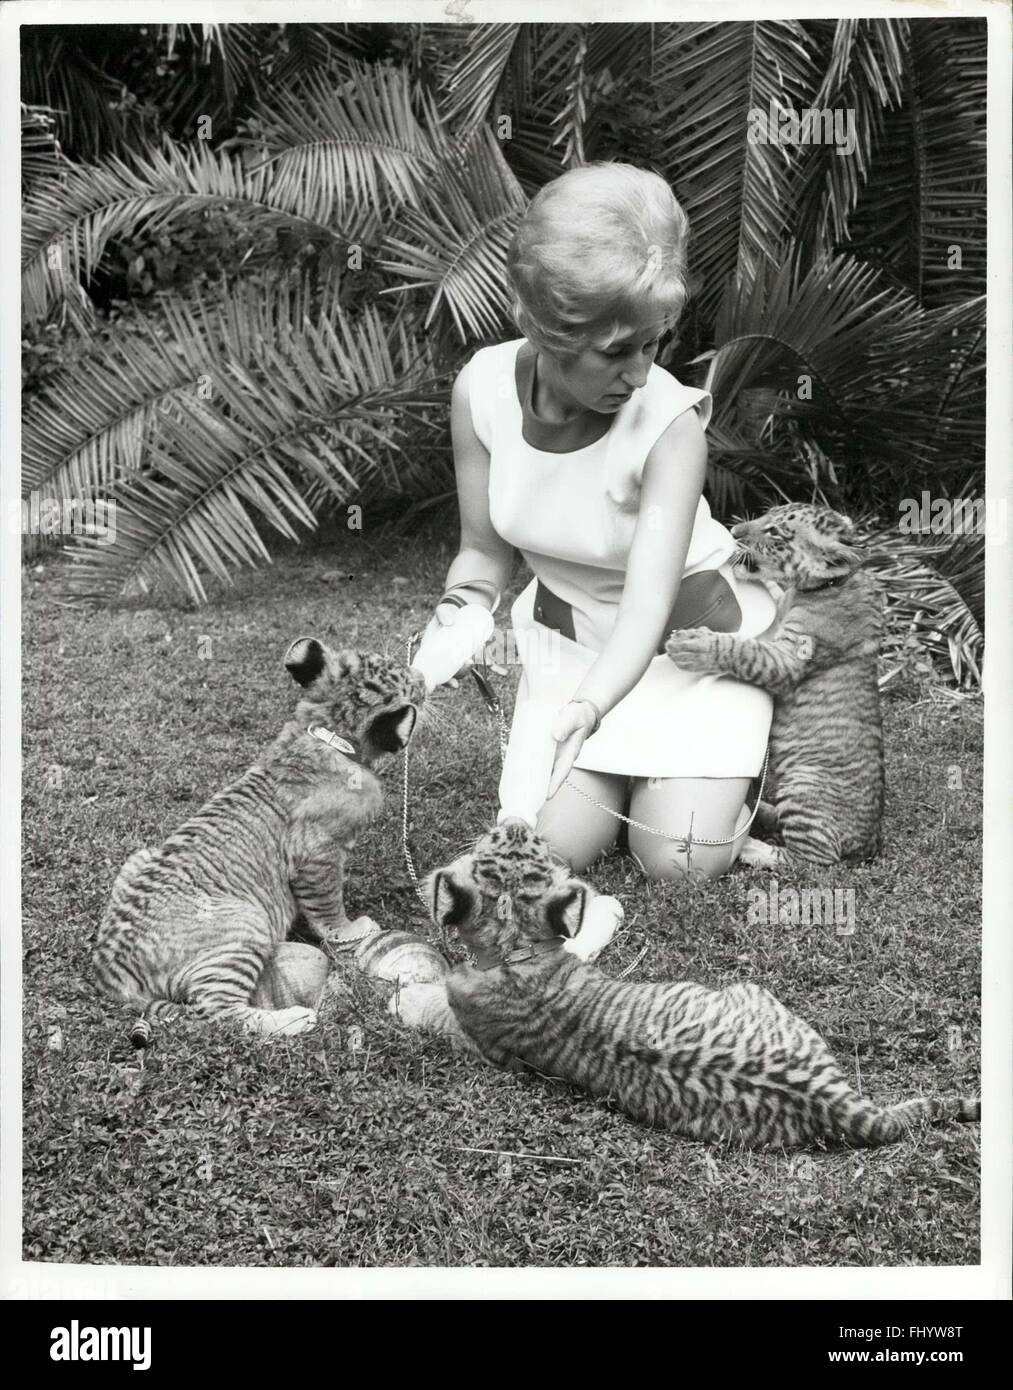 1971 - It sure is hard to get a drink of water around here. seems to be the thought of the tiglon on the right. Mrs. Lawrence Tetzlaff, wife of famed wild animal collector Jungle Larry, tries to feed her priceless tiglons at Jungle Larry's Safari Land at Caribbean Gardens but finds two hands are not enough for triplets. The tiglons are the result of cross-breeding an African lioness and a giant Royal Bengal tiger. These three are believed to be the only ones in the world at the present time. © Keystone Pictures USA/ZUMAPRESS.com/Alamy Live News Stock Photo